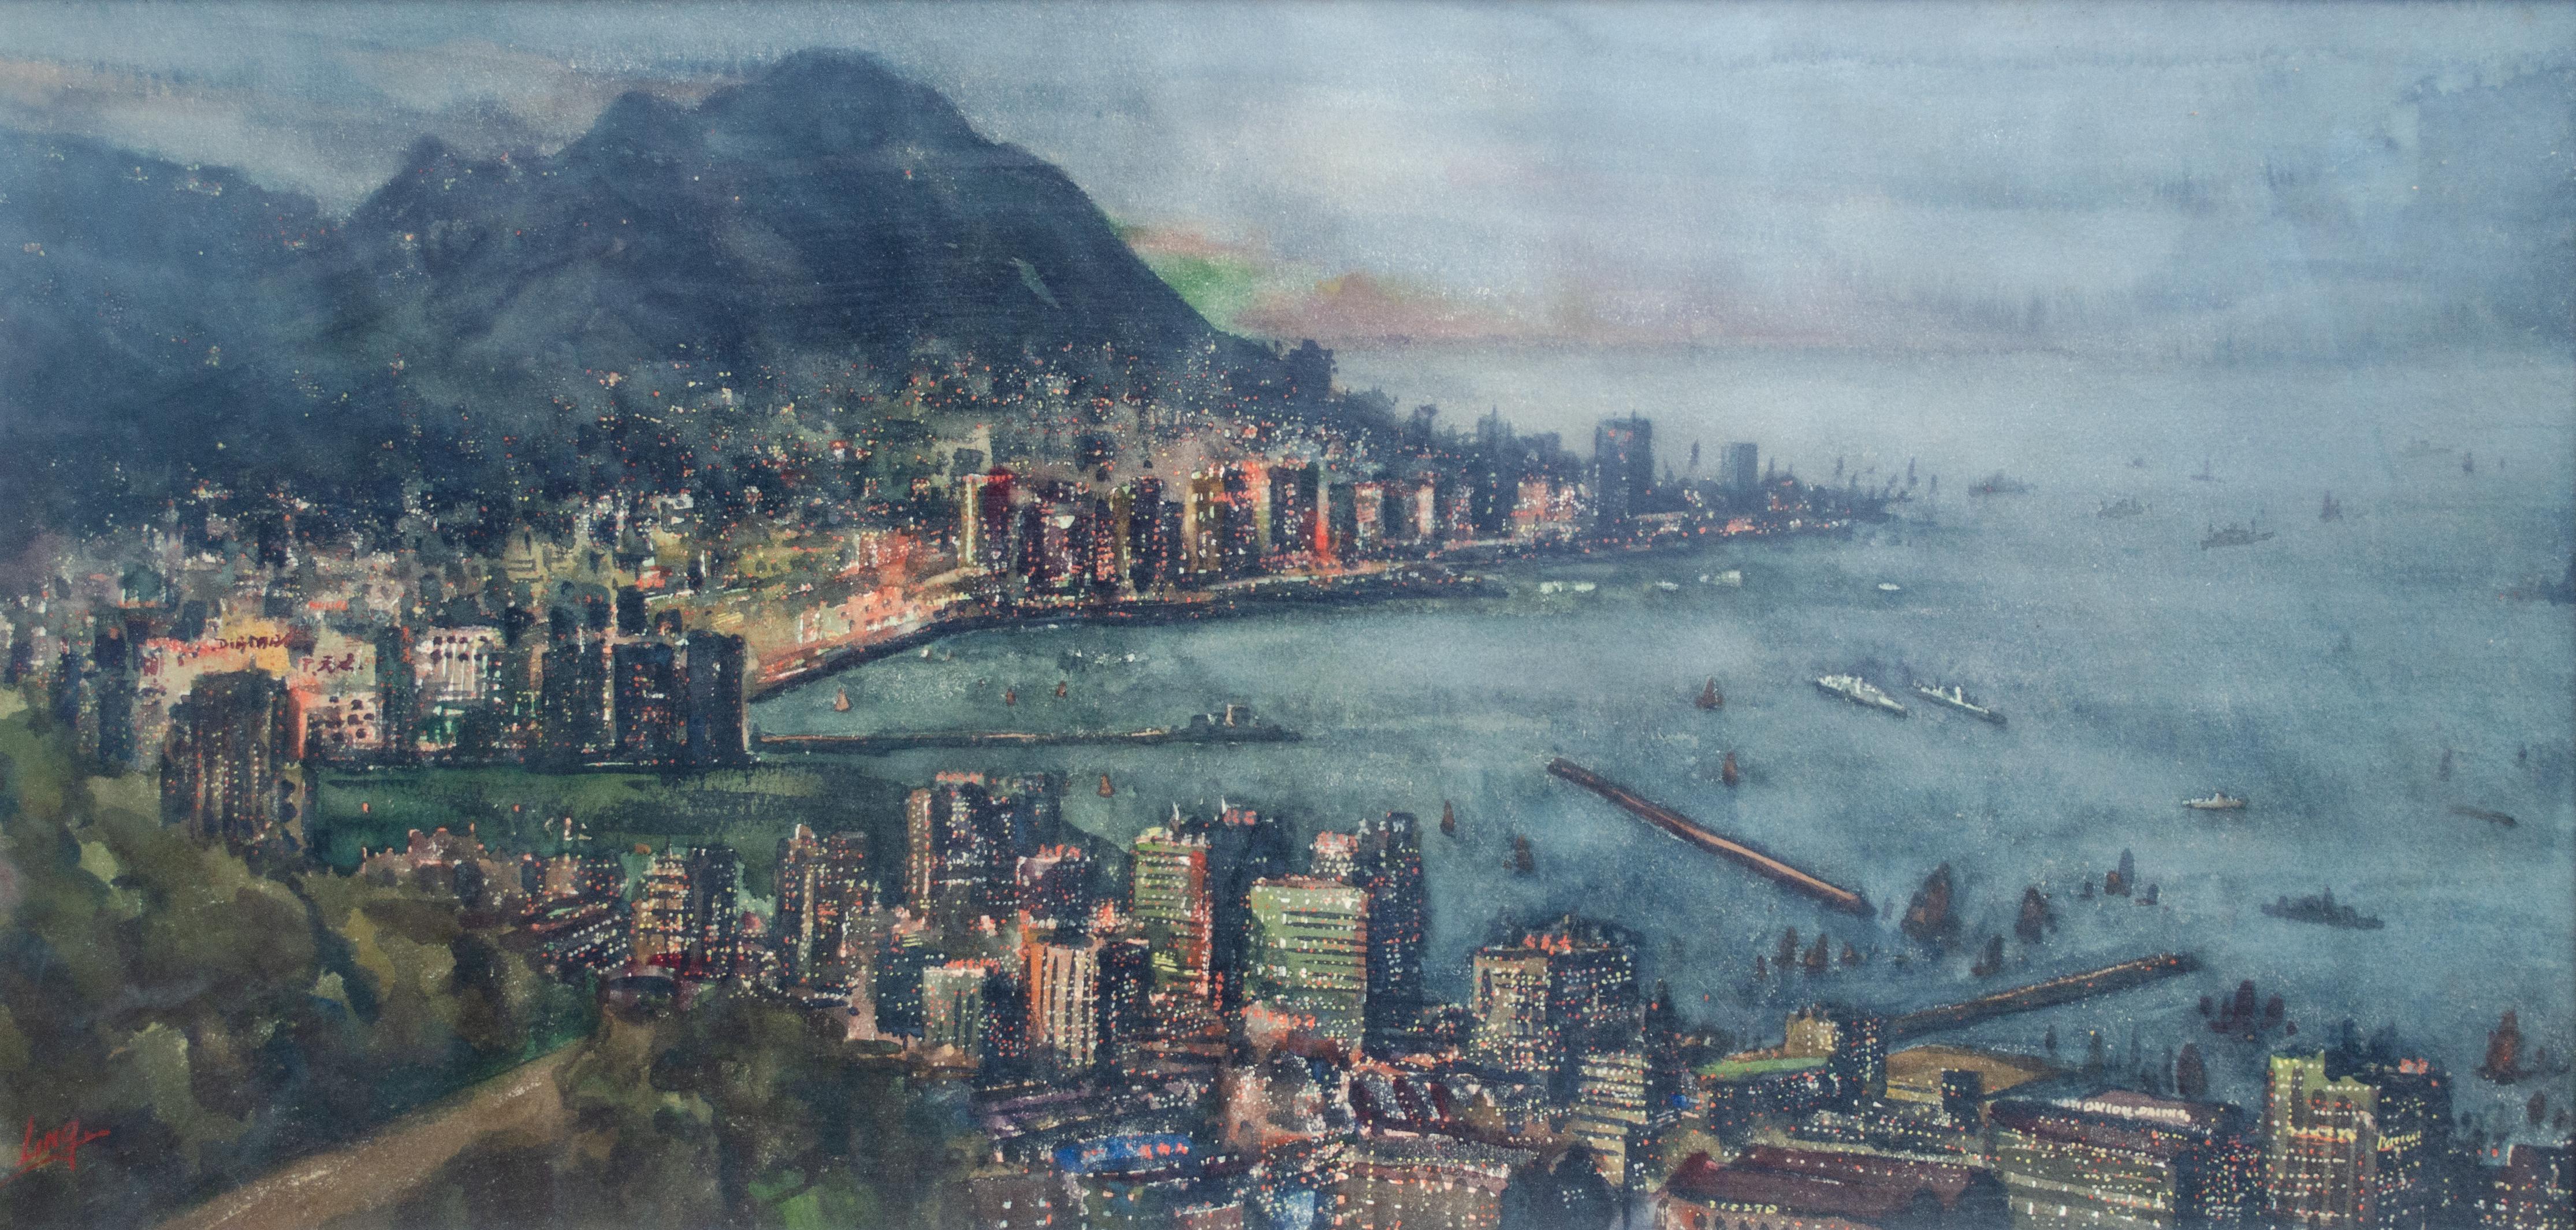 Kam Cheung Ling (Hong Kong, 1911-1991)
Untitled (View of Macao or Hong Kong), 20th Century
Watercolor on paper
Sight size: 13 3/8 x 27 in.
Framed: 15 3/4 x 29 1/2 in.
Signed lower left: Ling

Kam Cheong Ling (1911-1991) was one of the first artists